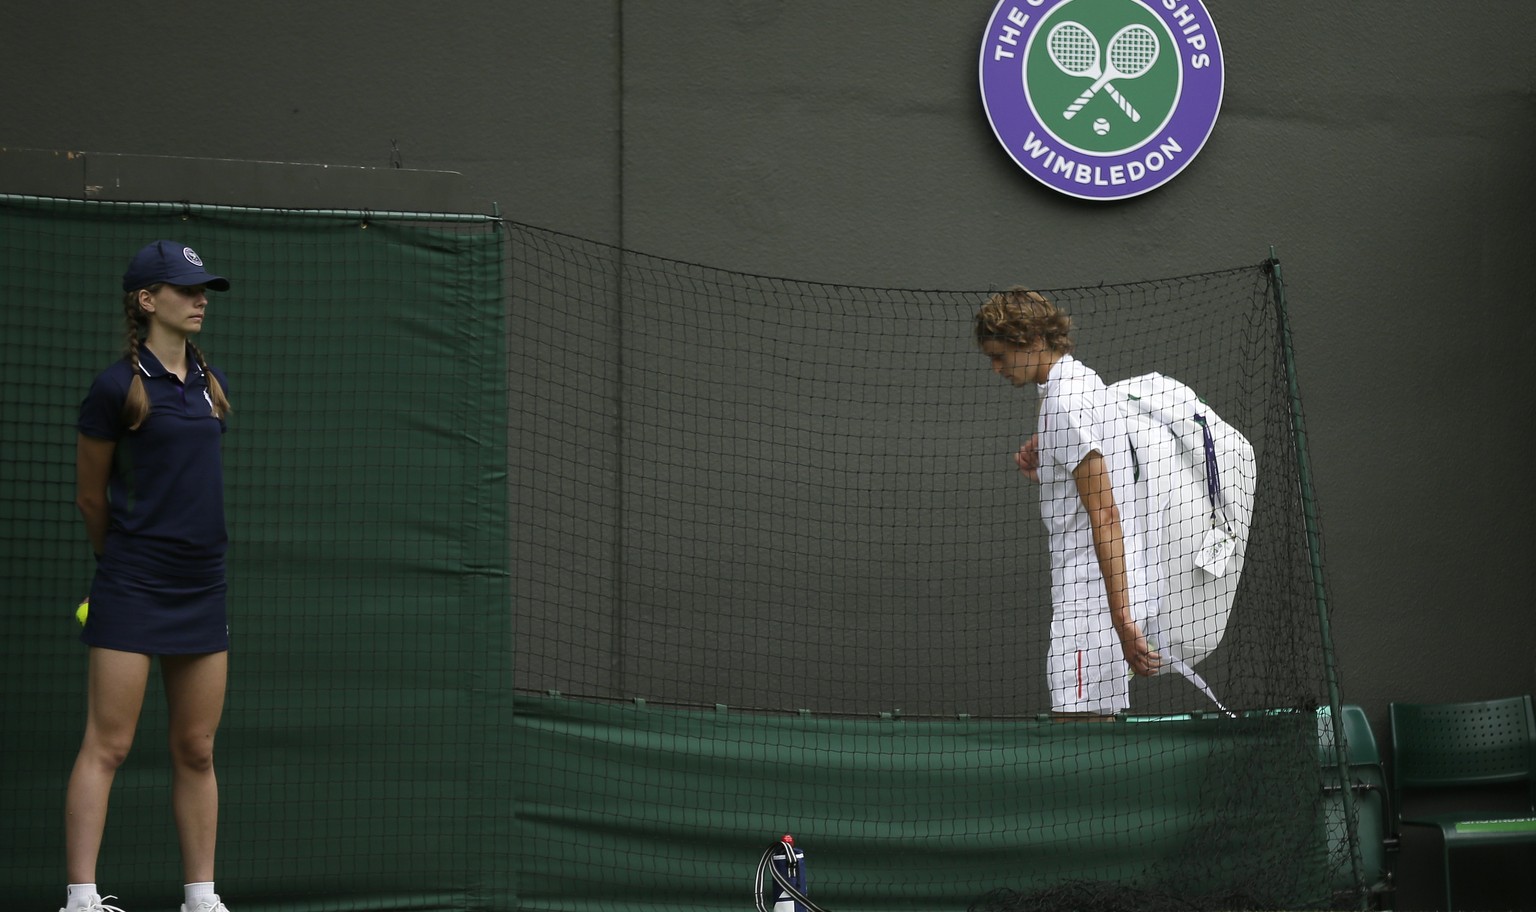 Germany&#039;s Alexander Zverev leaves the court after losing to Czech Republic&#039;s in a Men&#039;s singles match during day one of the Wimbledon Tennis Championships in London, Monday, July 1, 201 ...